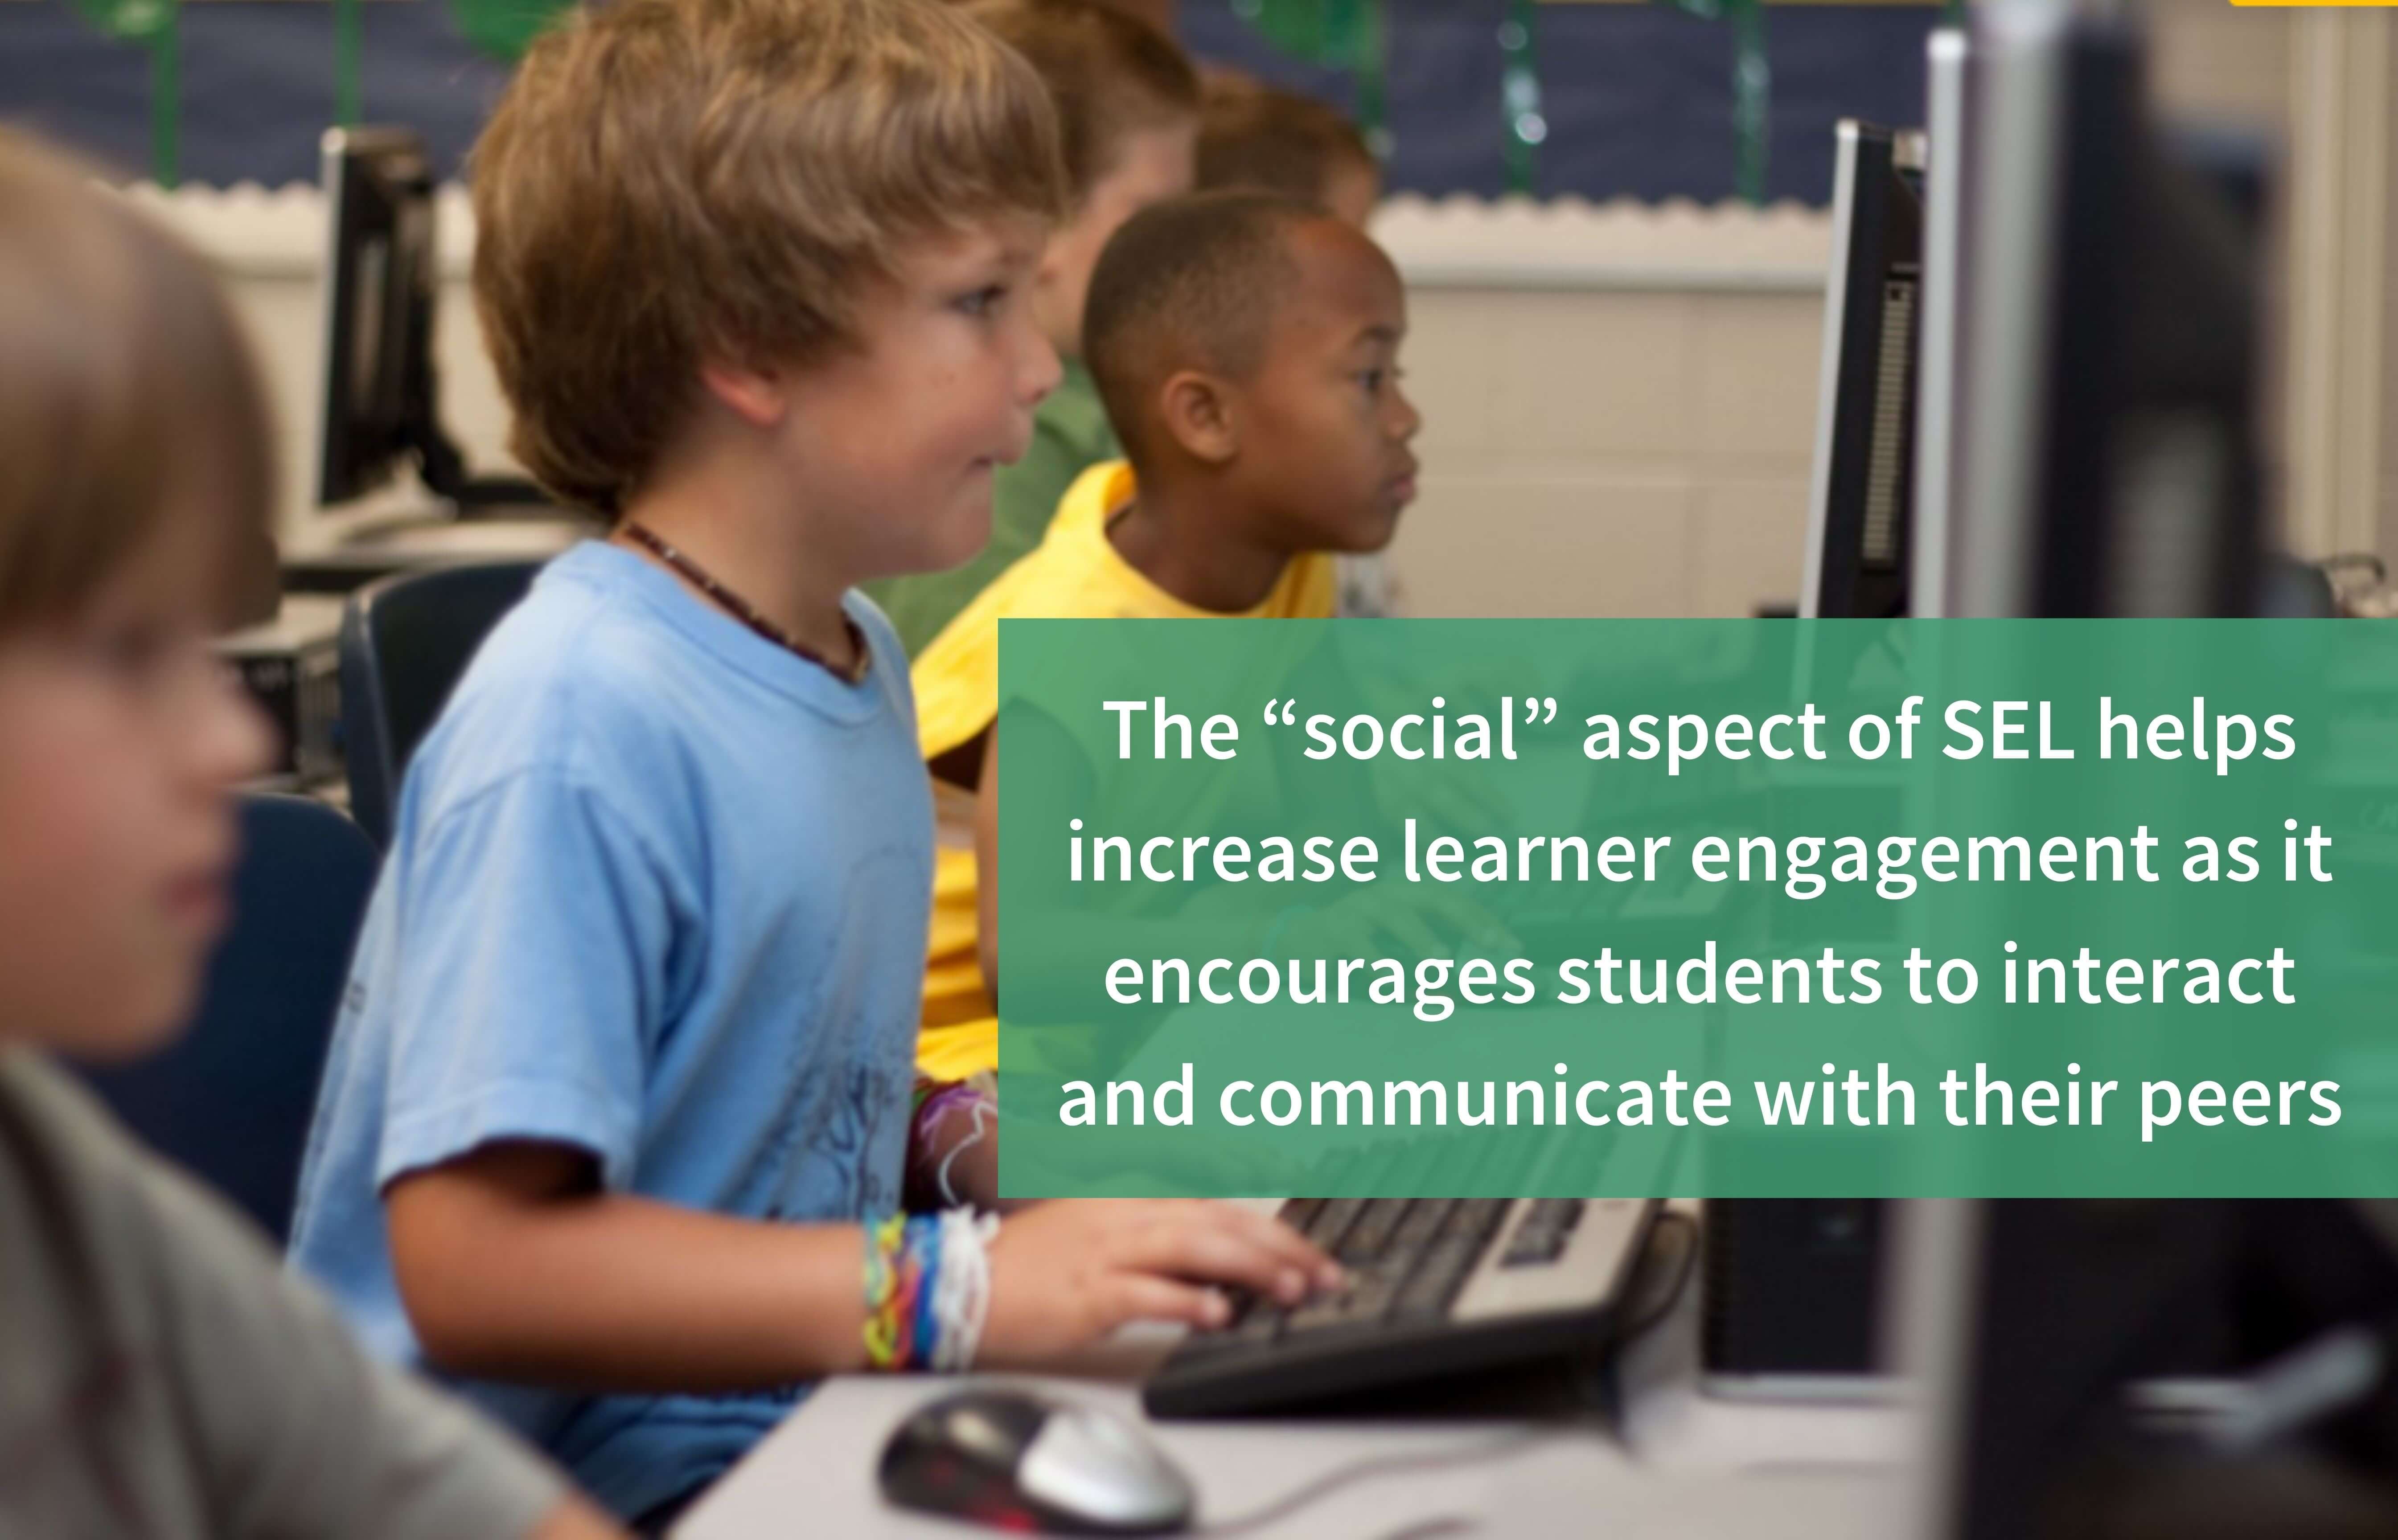 Teachers can integrate SEL to increase engagement in online learning for students